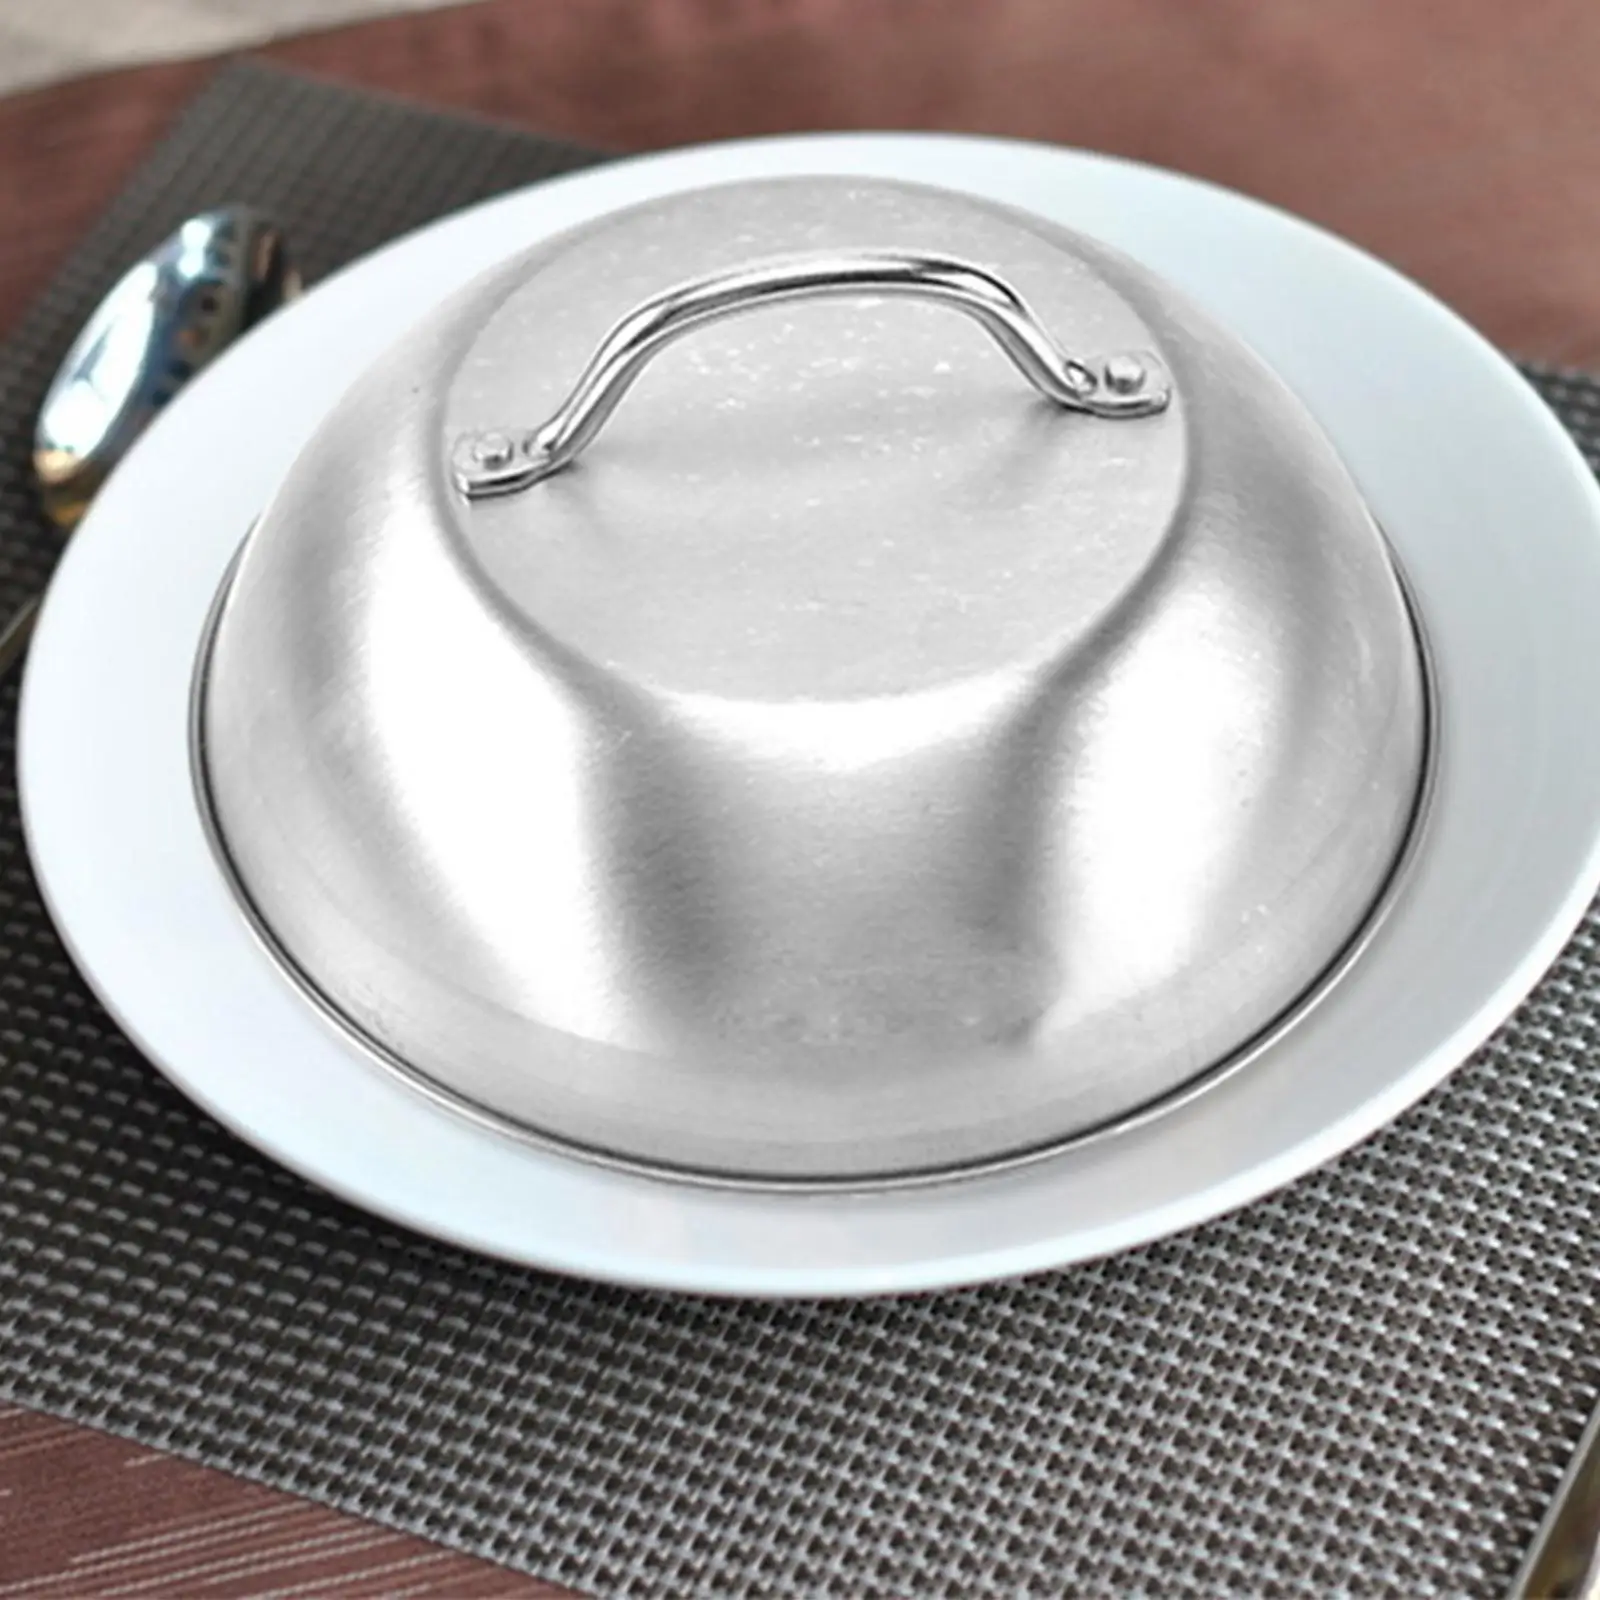 Stainless Steel Basting Covers Serving Dish Lid Griddle Accessories Steak Cover for Store Kitchen Supplies Camping Household